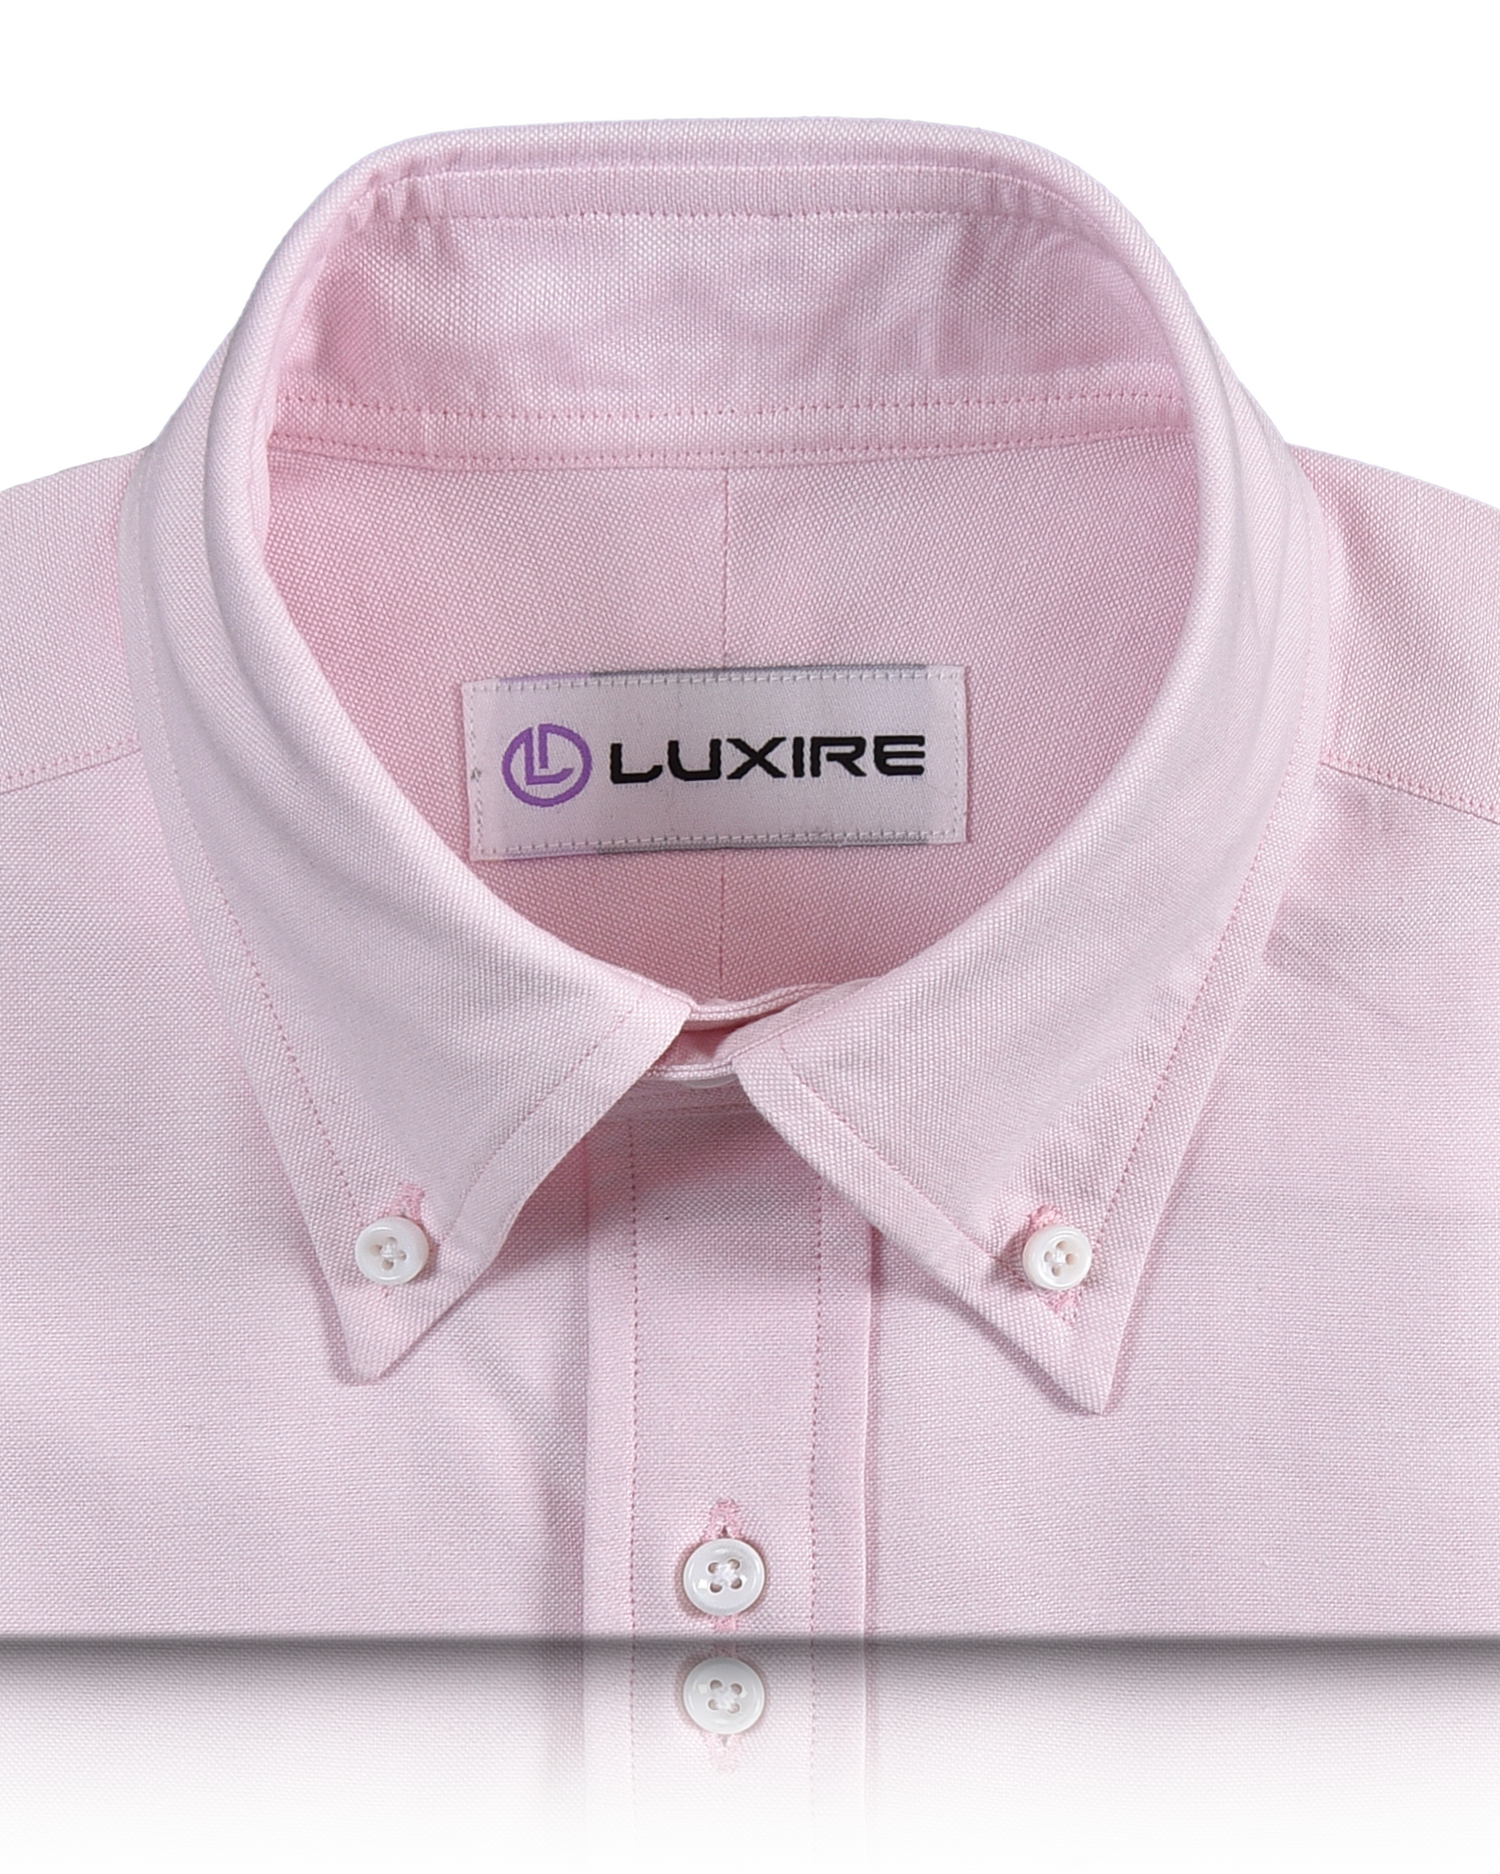 Collar of the custom oxford shirt for men by Luxire in pale pink 2